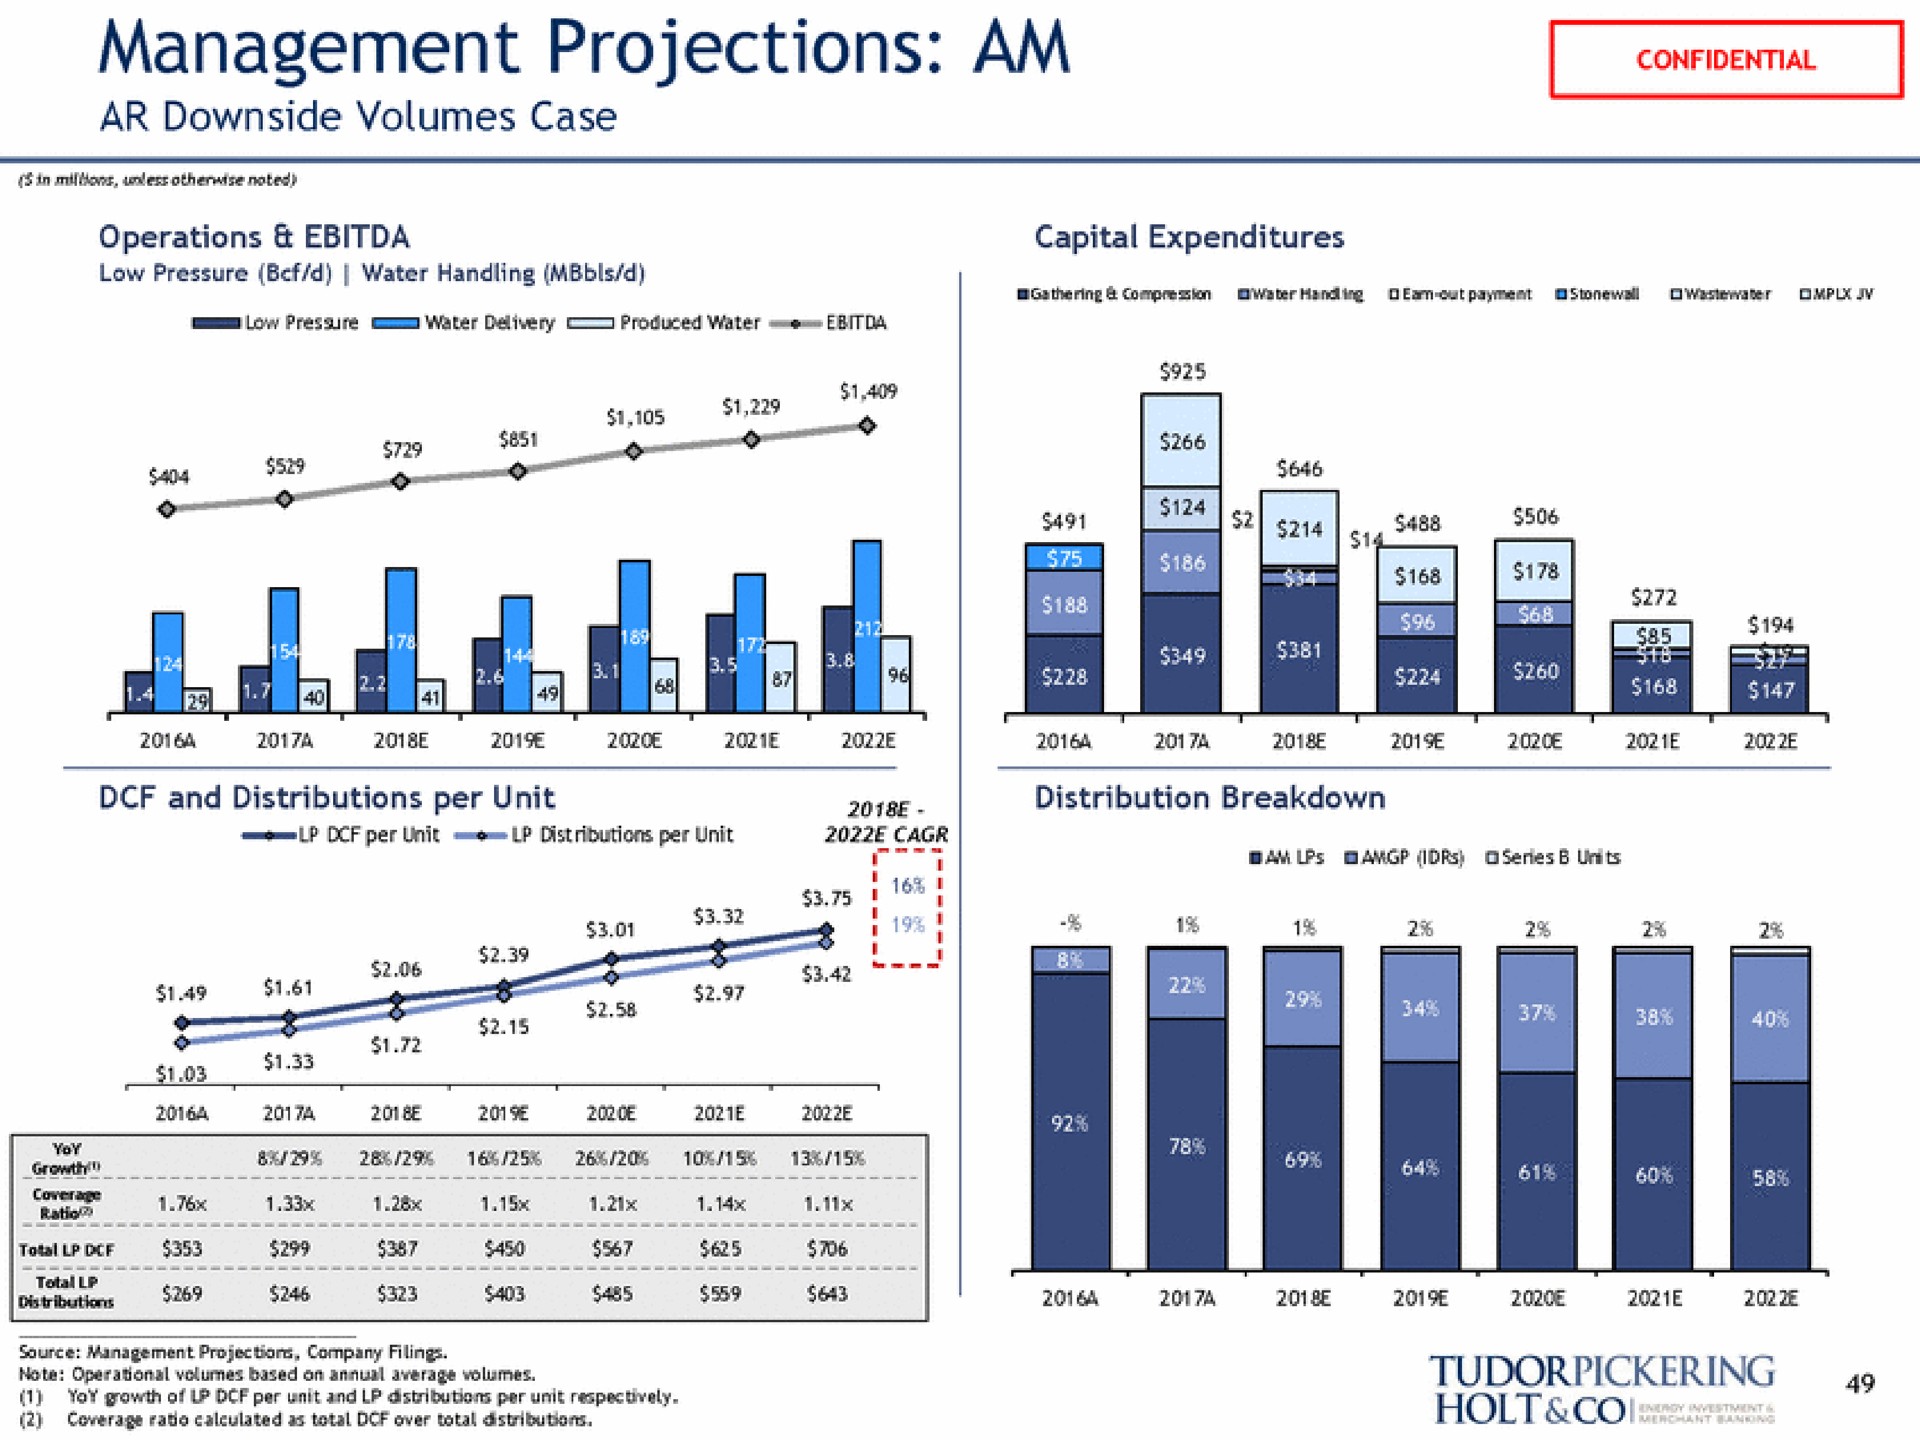 management projections am operational volumes based on annual average | Tudor, Pickering, Holt & Co